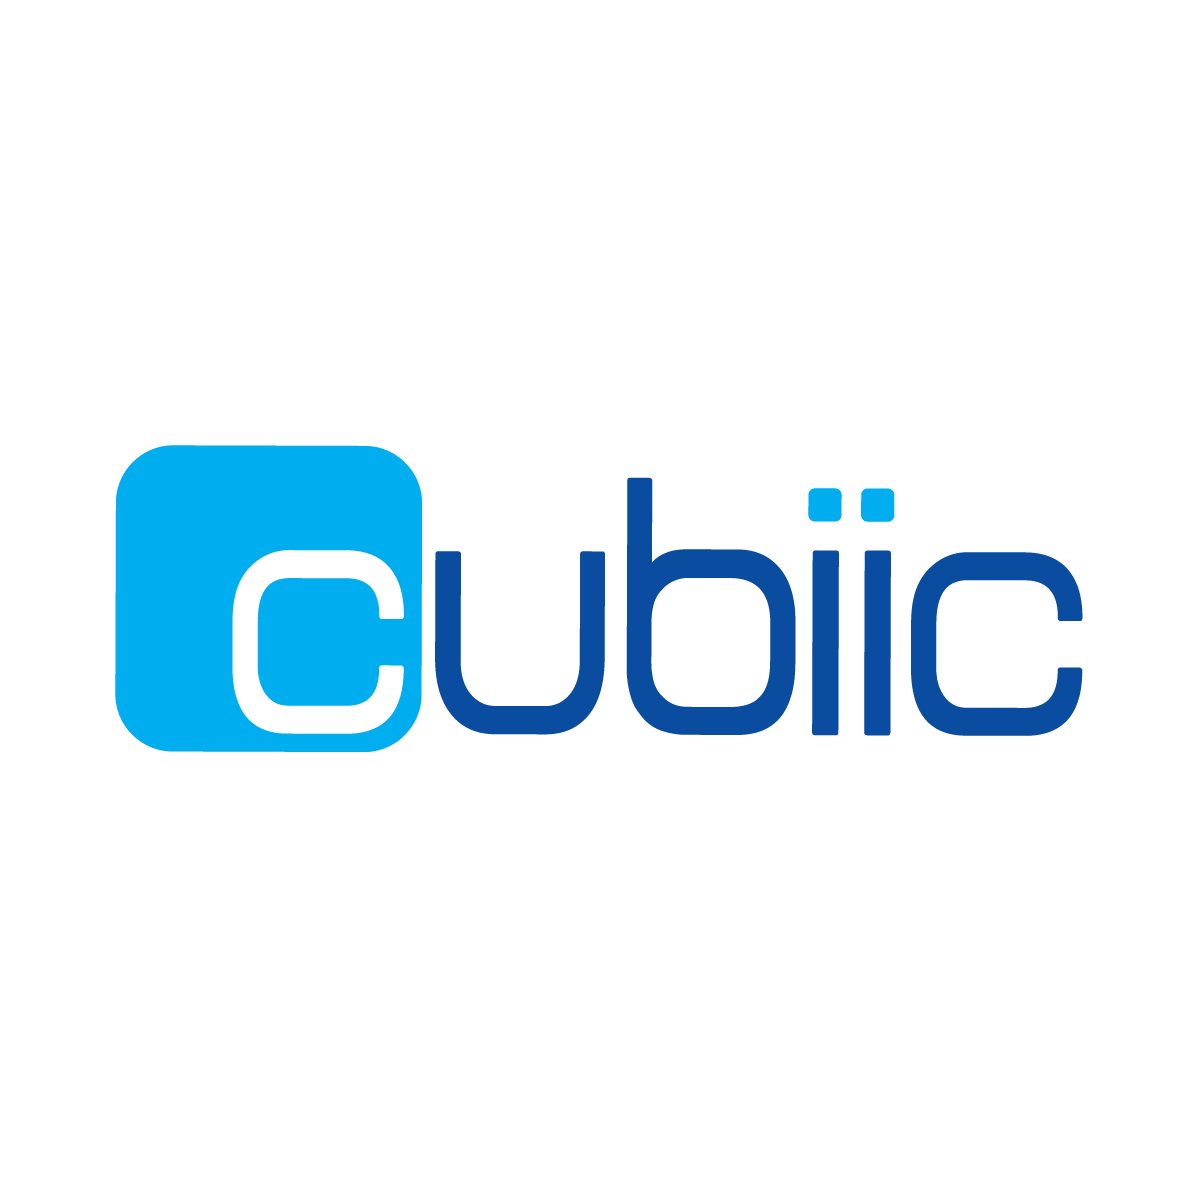 Cubiic for Shopify